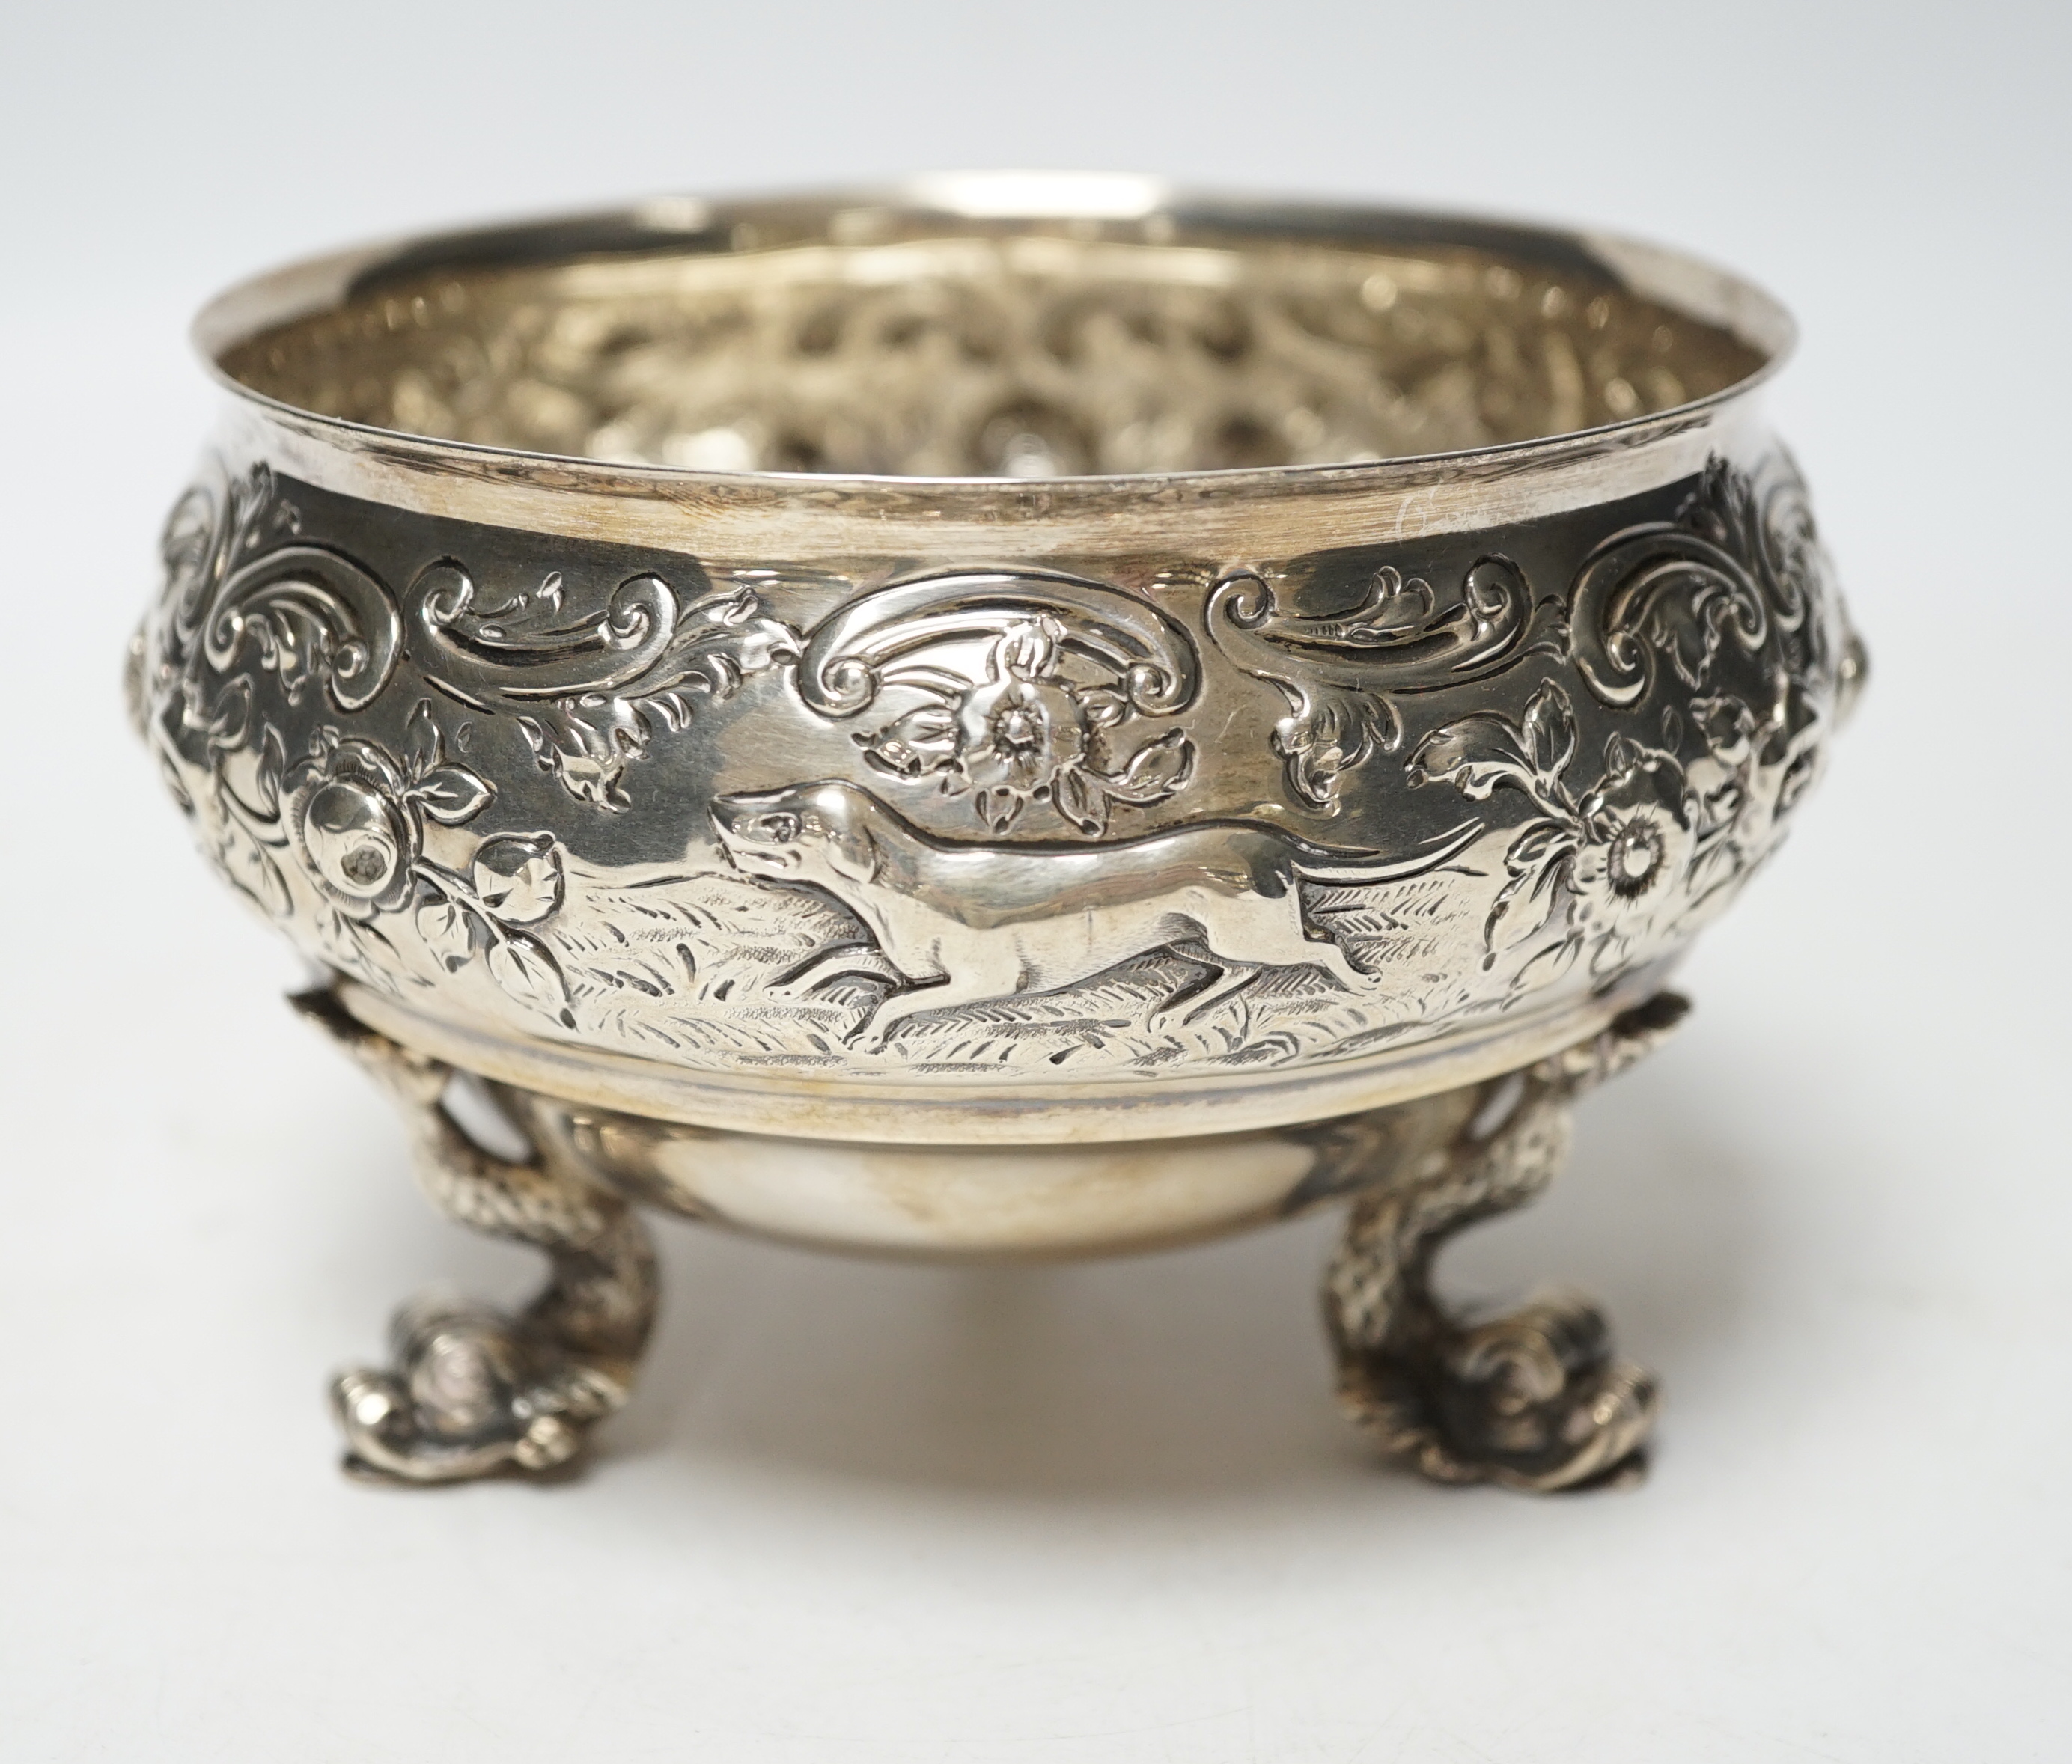 An Edwardian embossed silver bowl, on three dolphin supports, Wakely & Wheeler, London, 1905, diameter 11.6cm, 11.4oz.